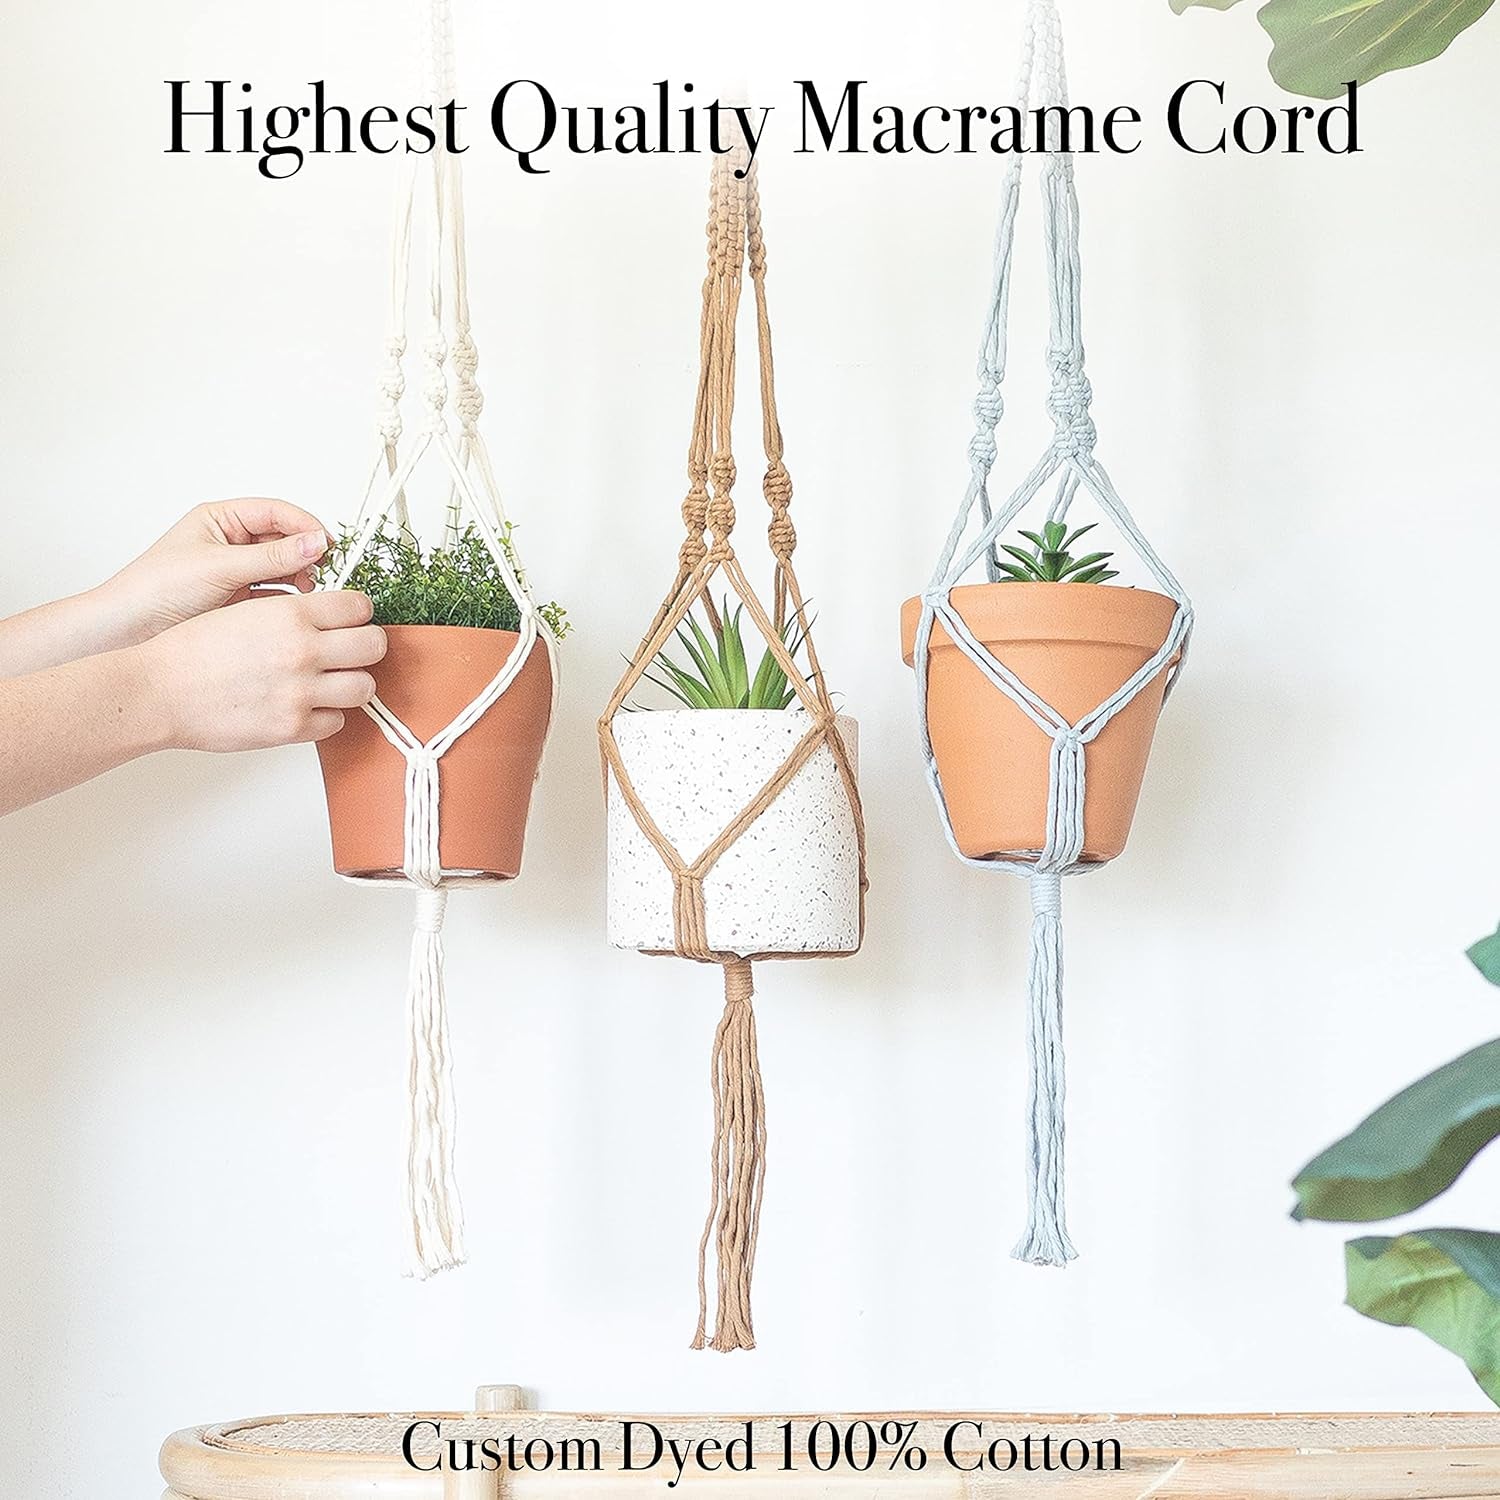 Macrame Kit, Makes 3 DIY Plant Hangers for Teens & Adult Beginners, Craft Supplies for Boho Art Project-3 Custom Color Macrame Cord, Wooden Rings & Instructions